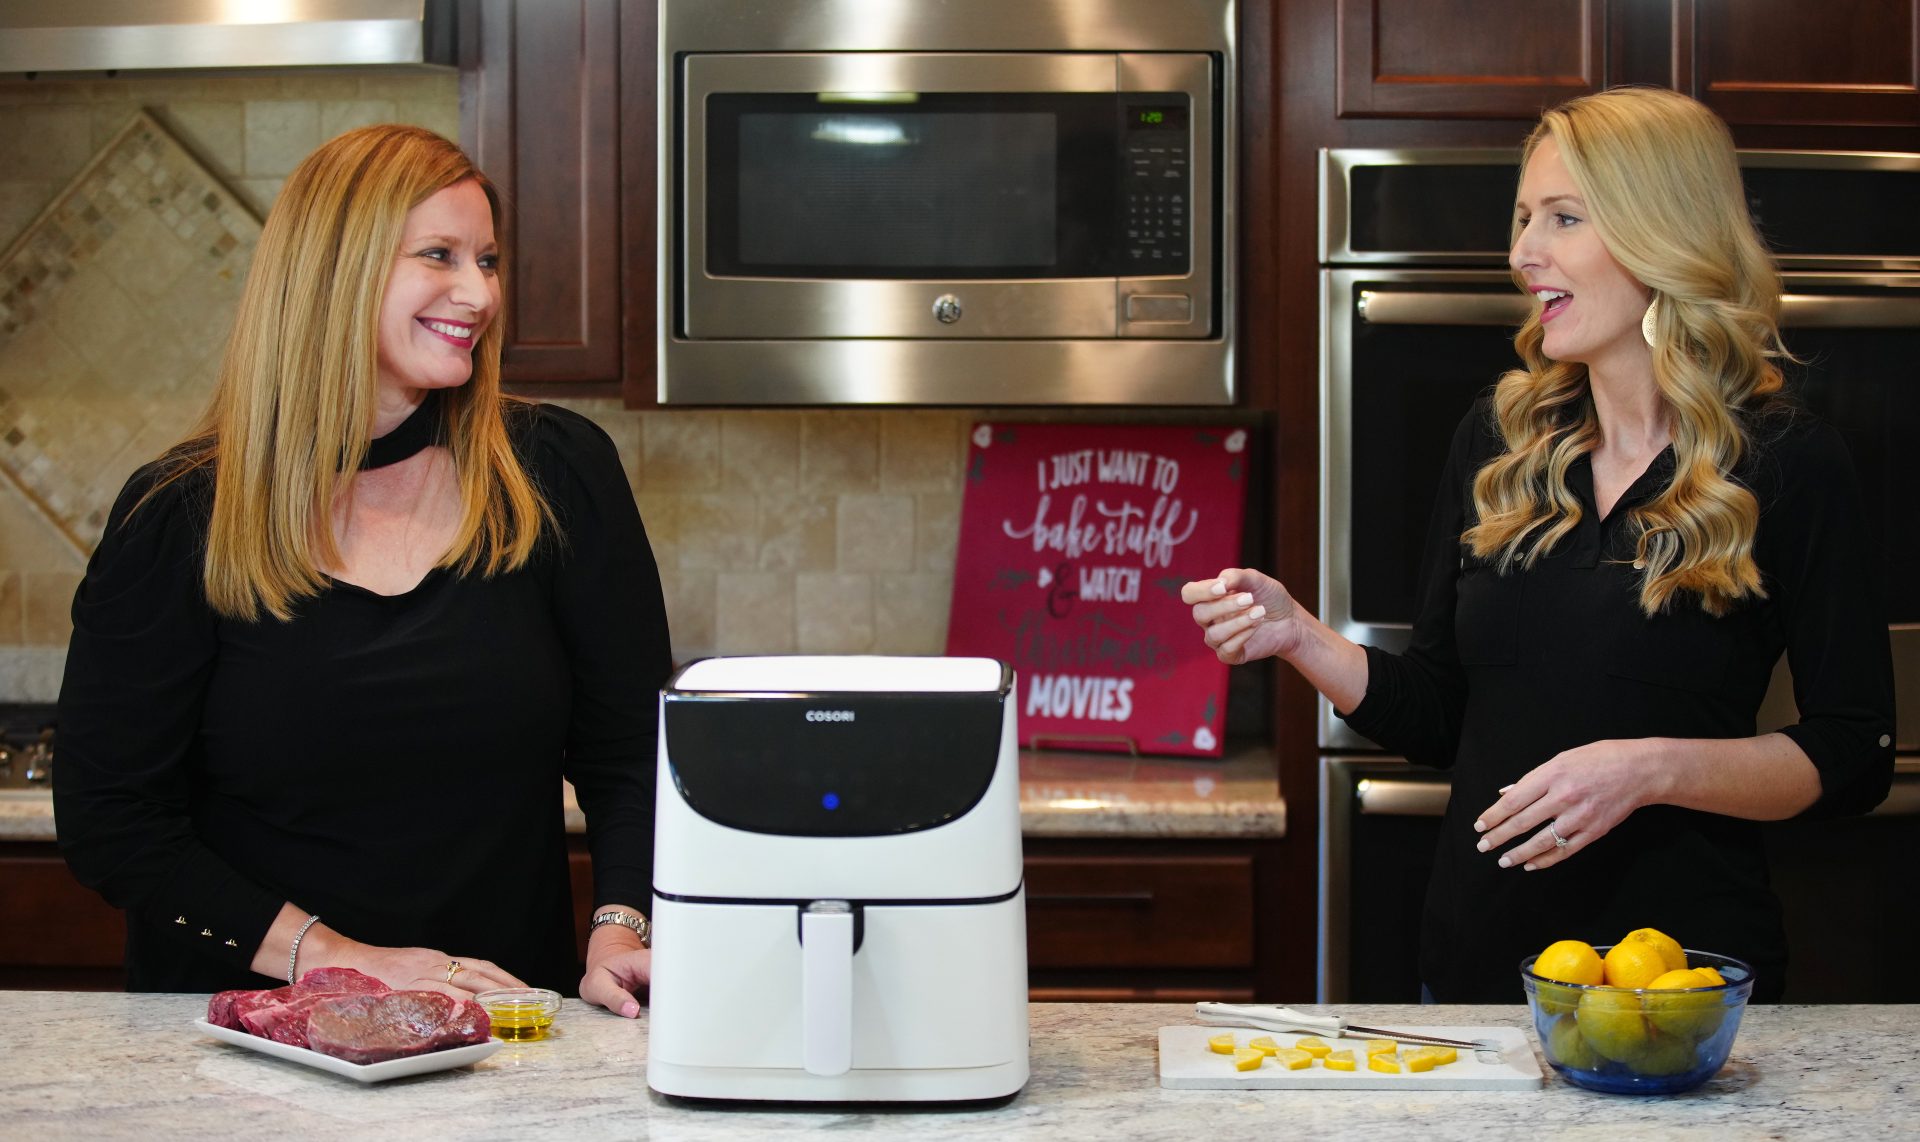 Jen and Rebecca talking in the kitchen about recipes, with a Cosori air fryer on the kitchen island. 